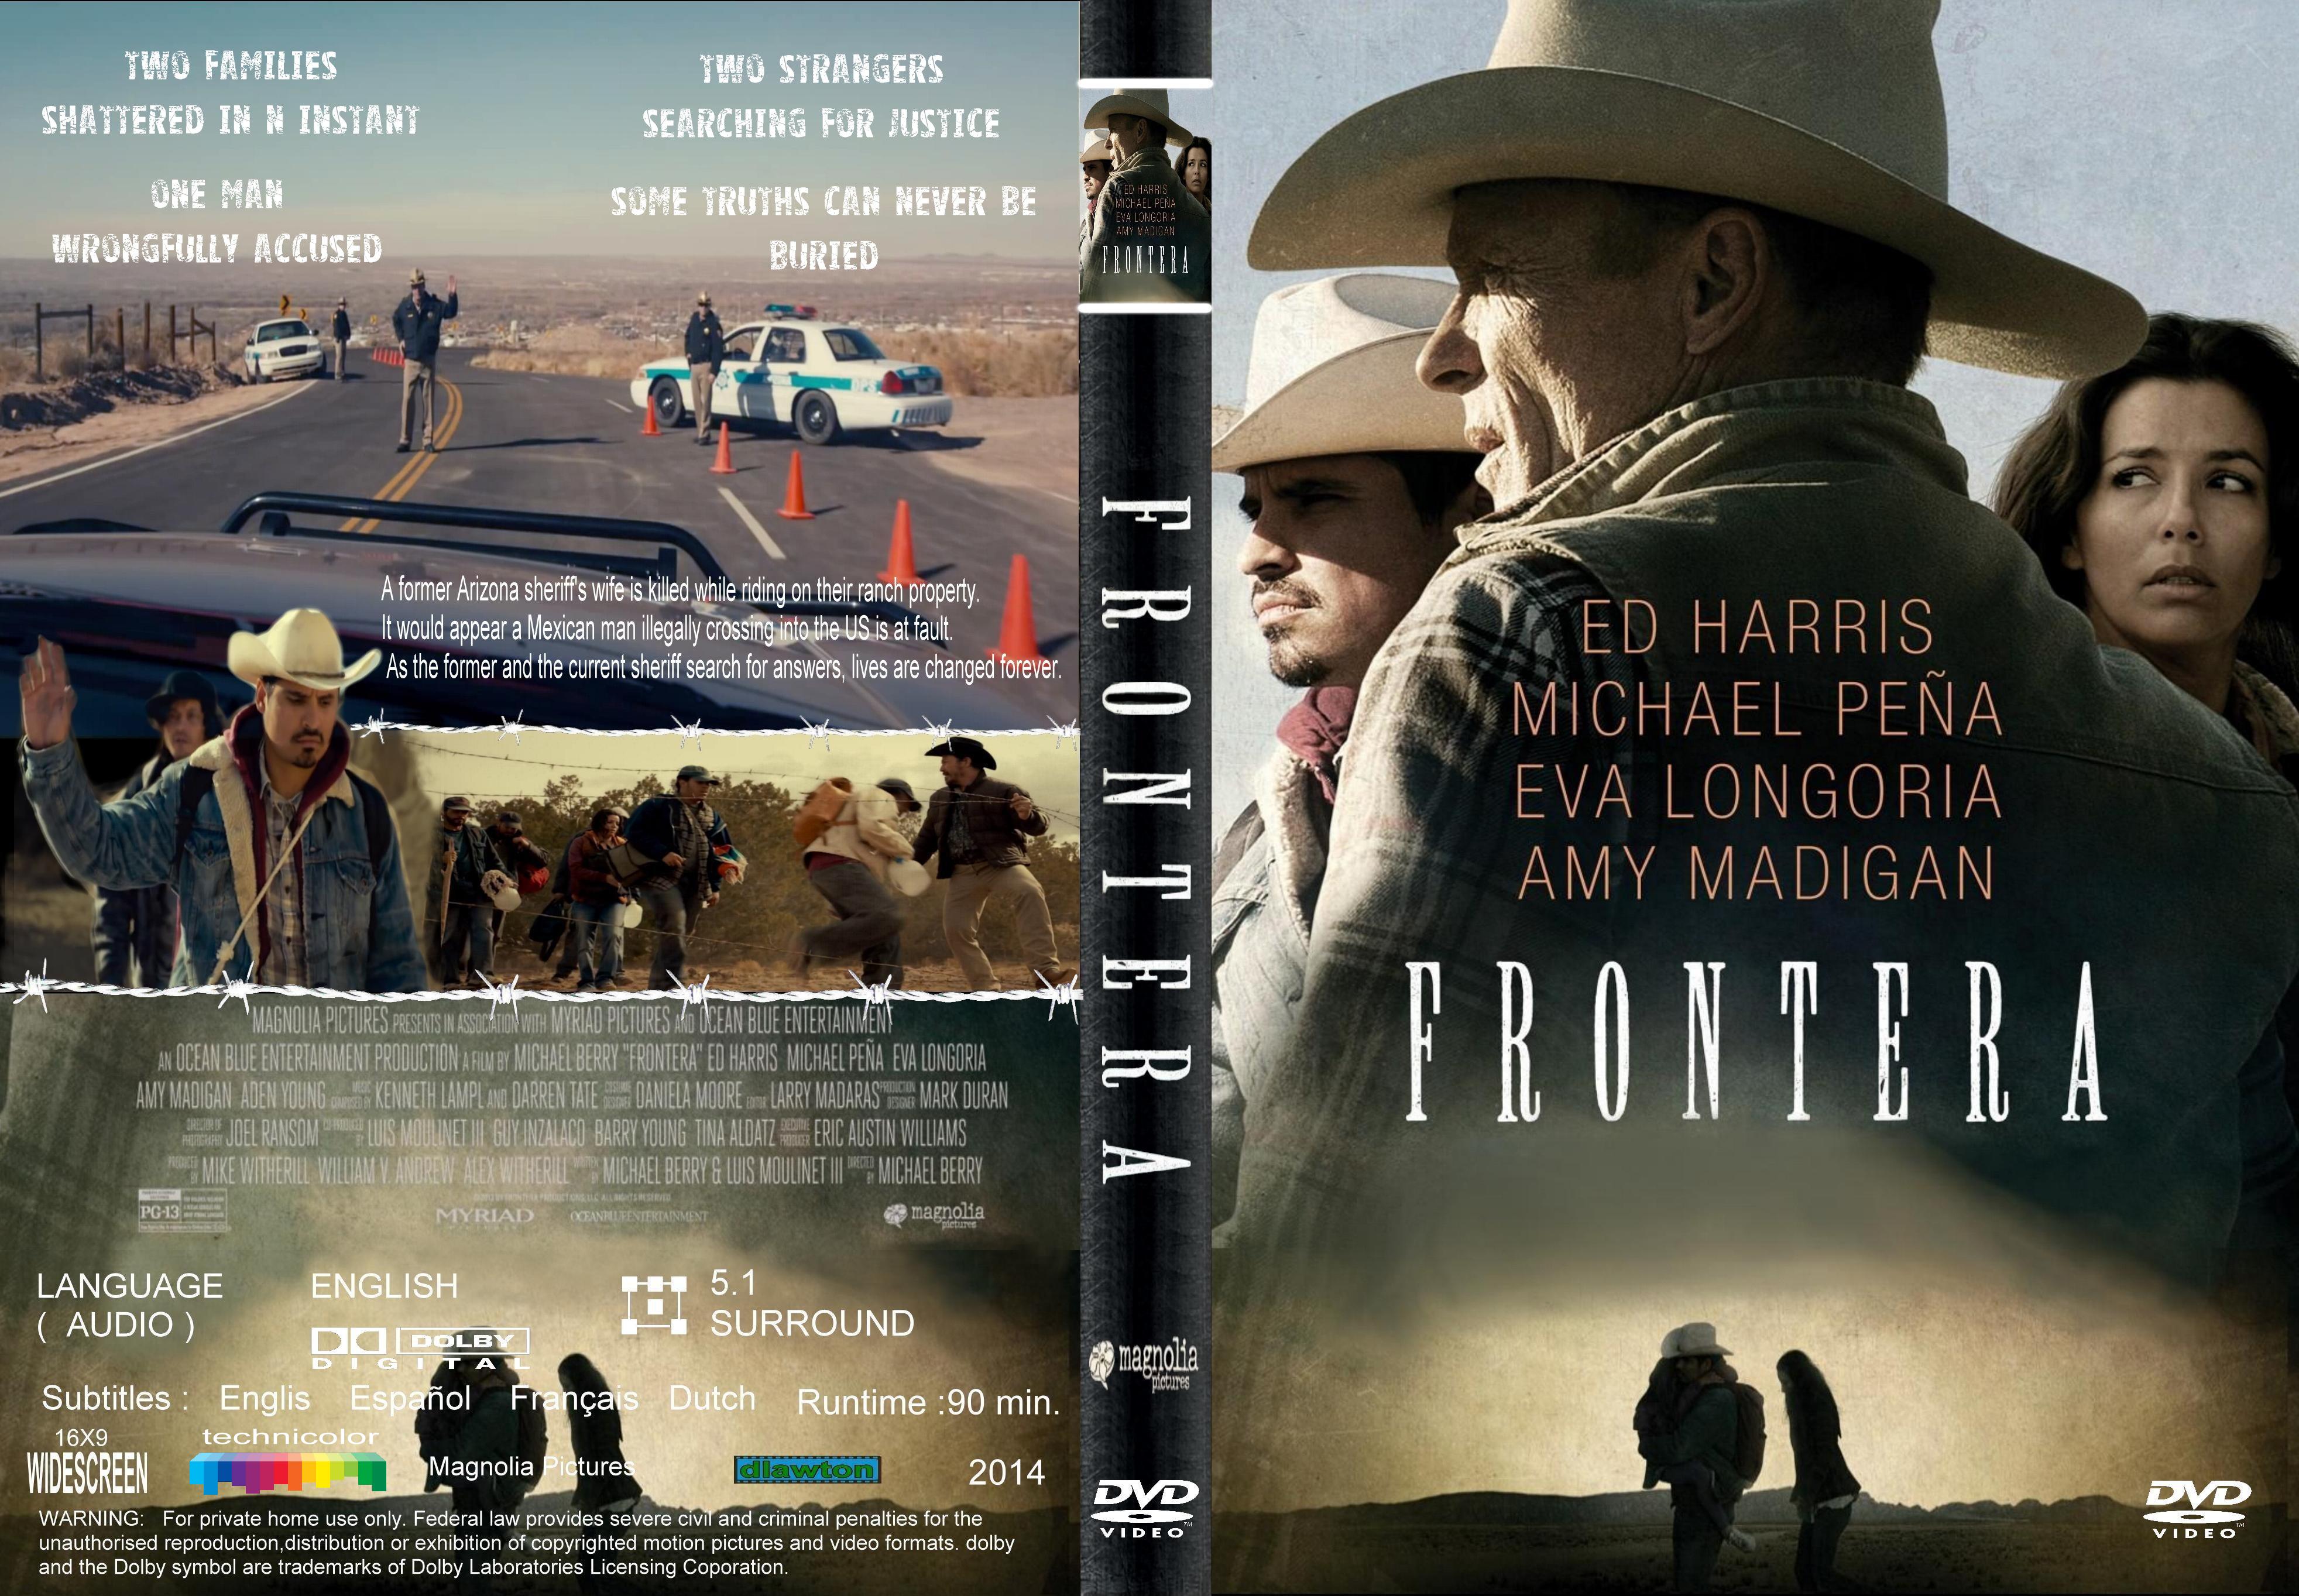 Download Frontera 2014 Full Hd Quality